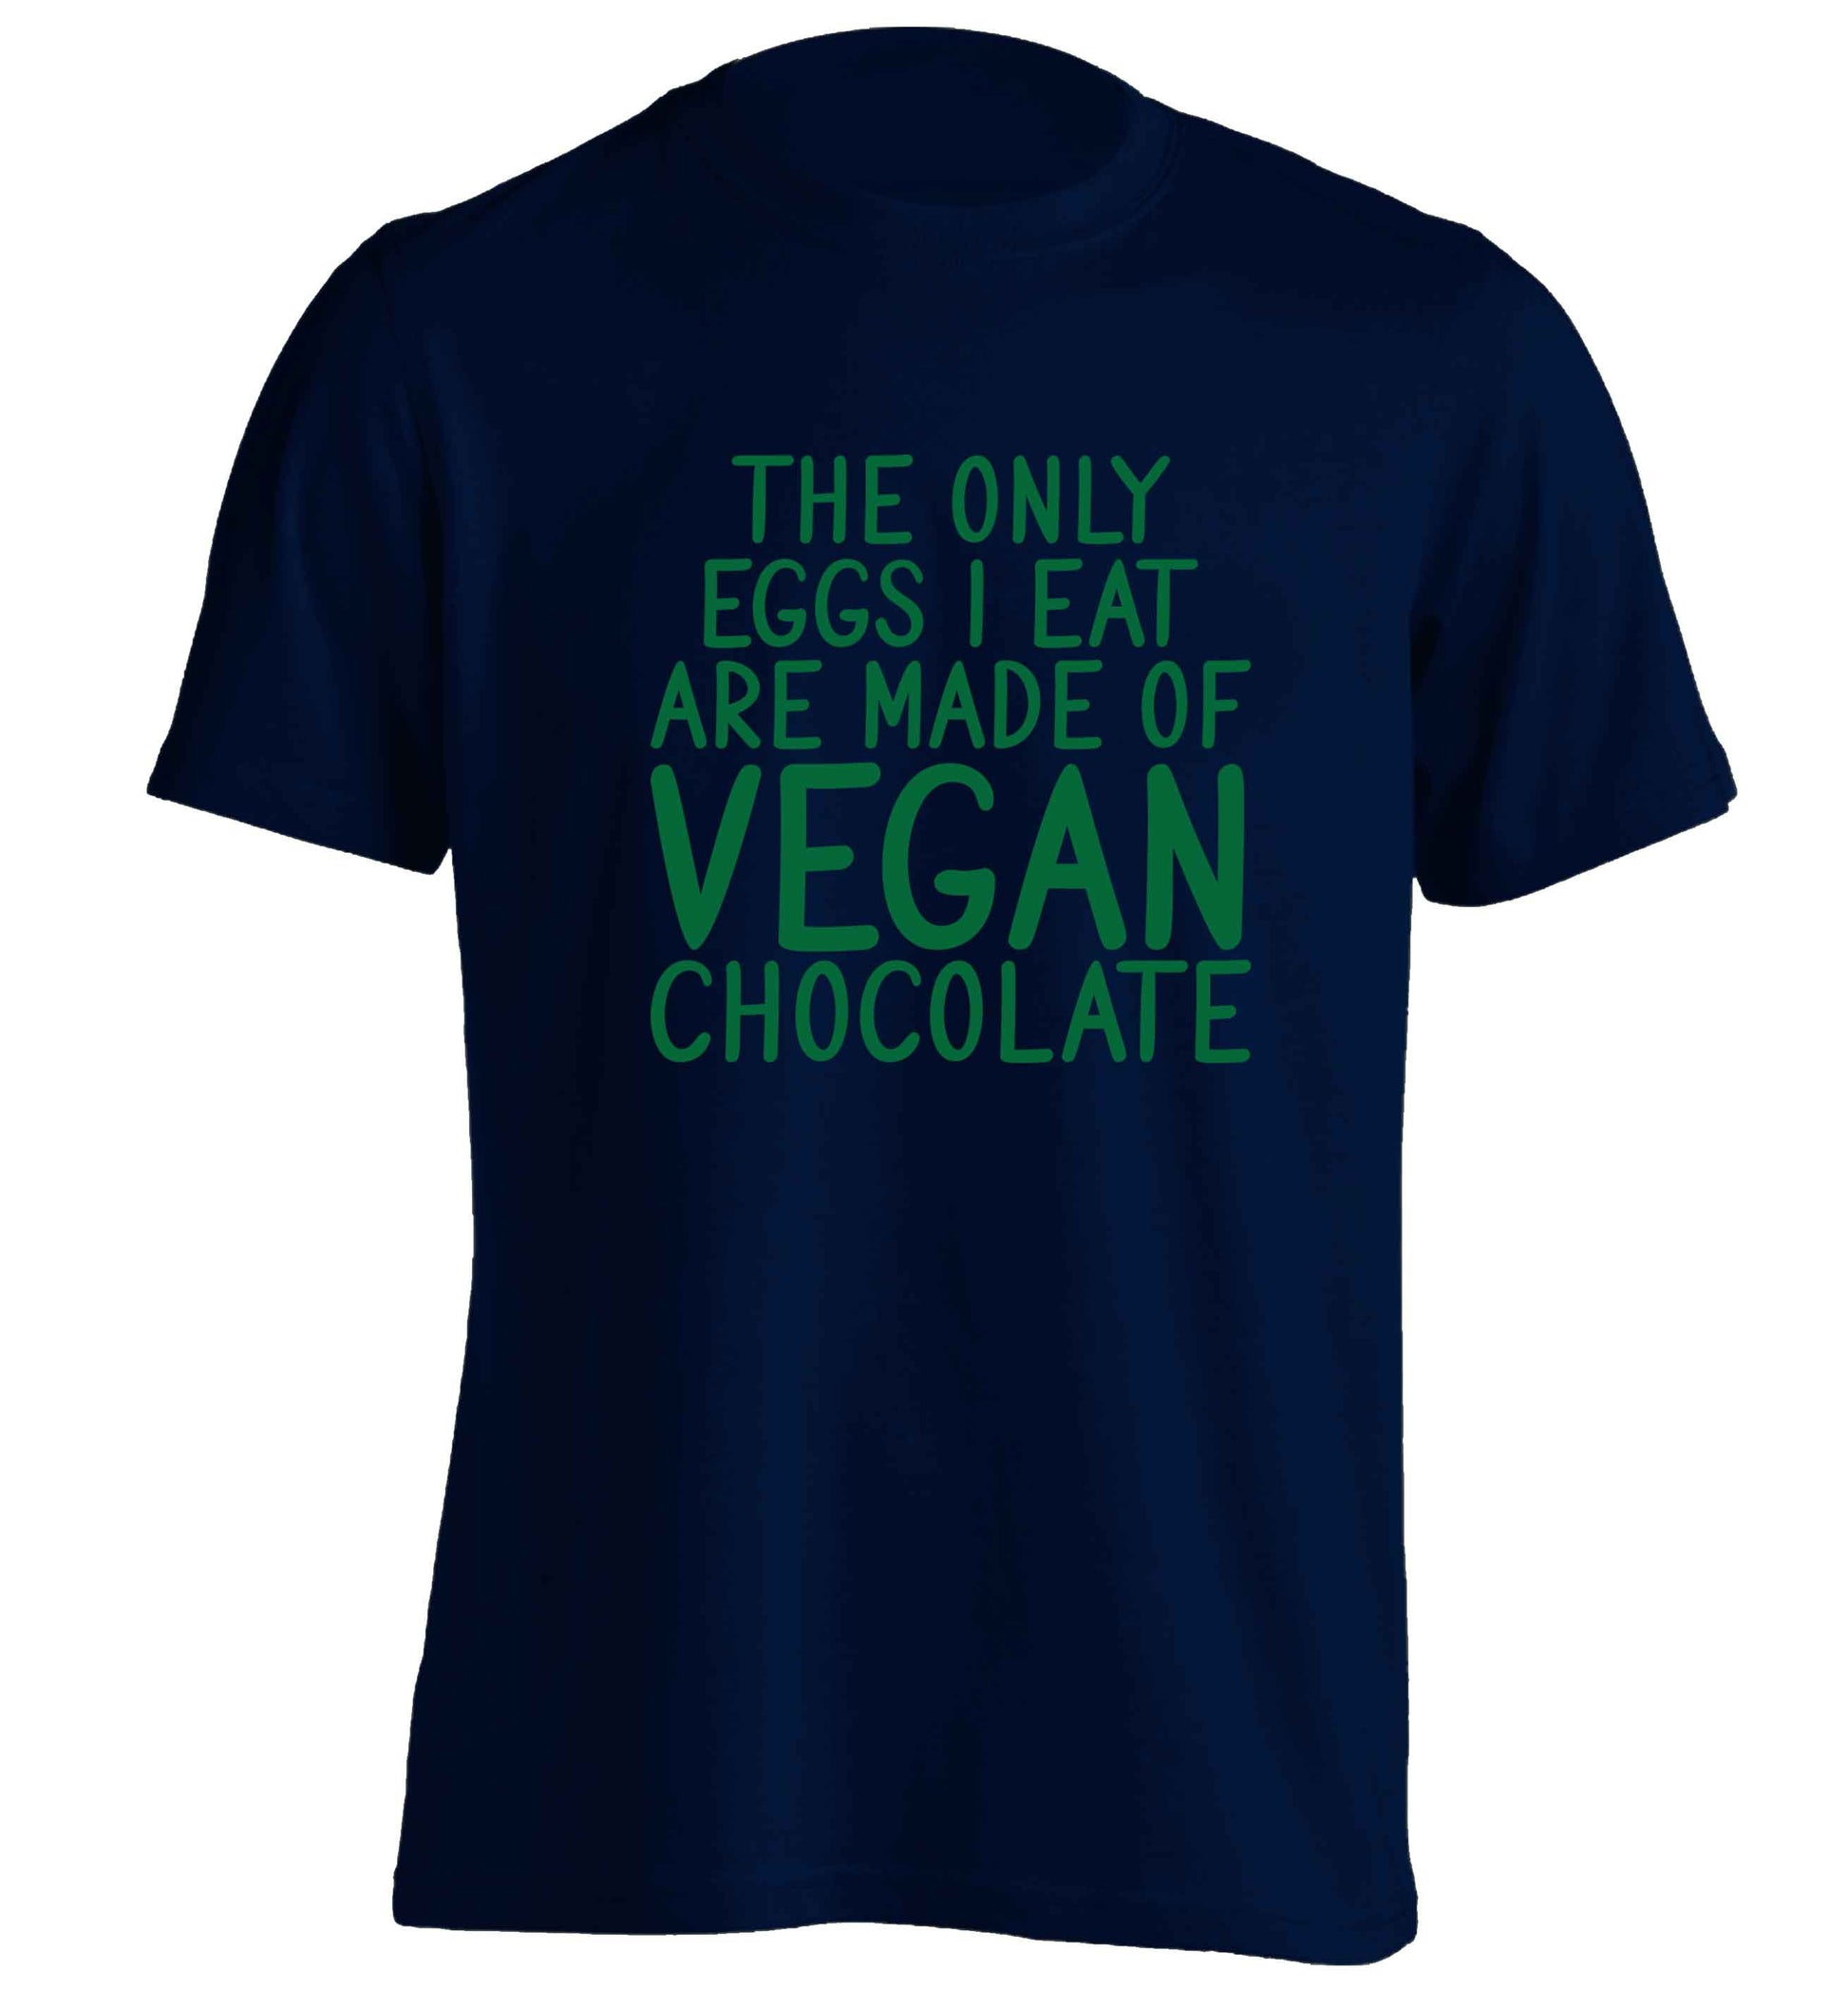 The only eggs I eat are made of vegan chocolate adults unisex navy Tshirt 2XL